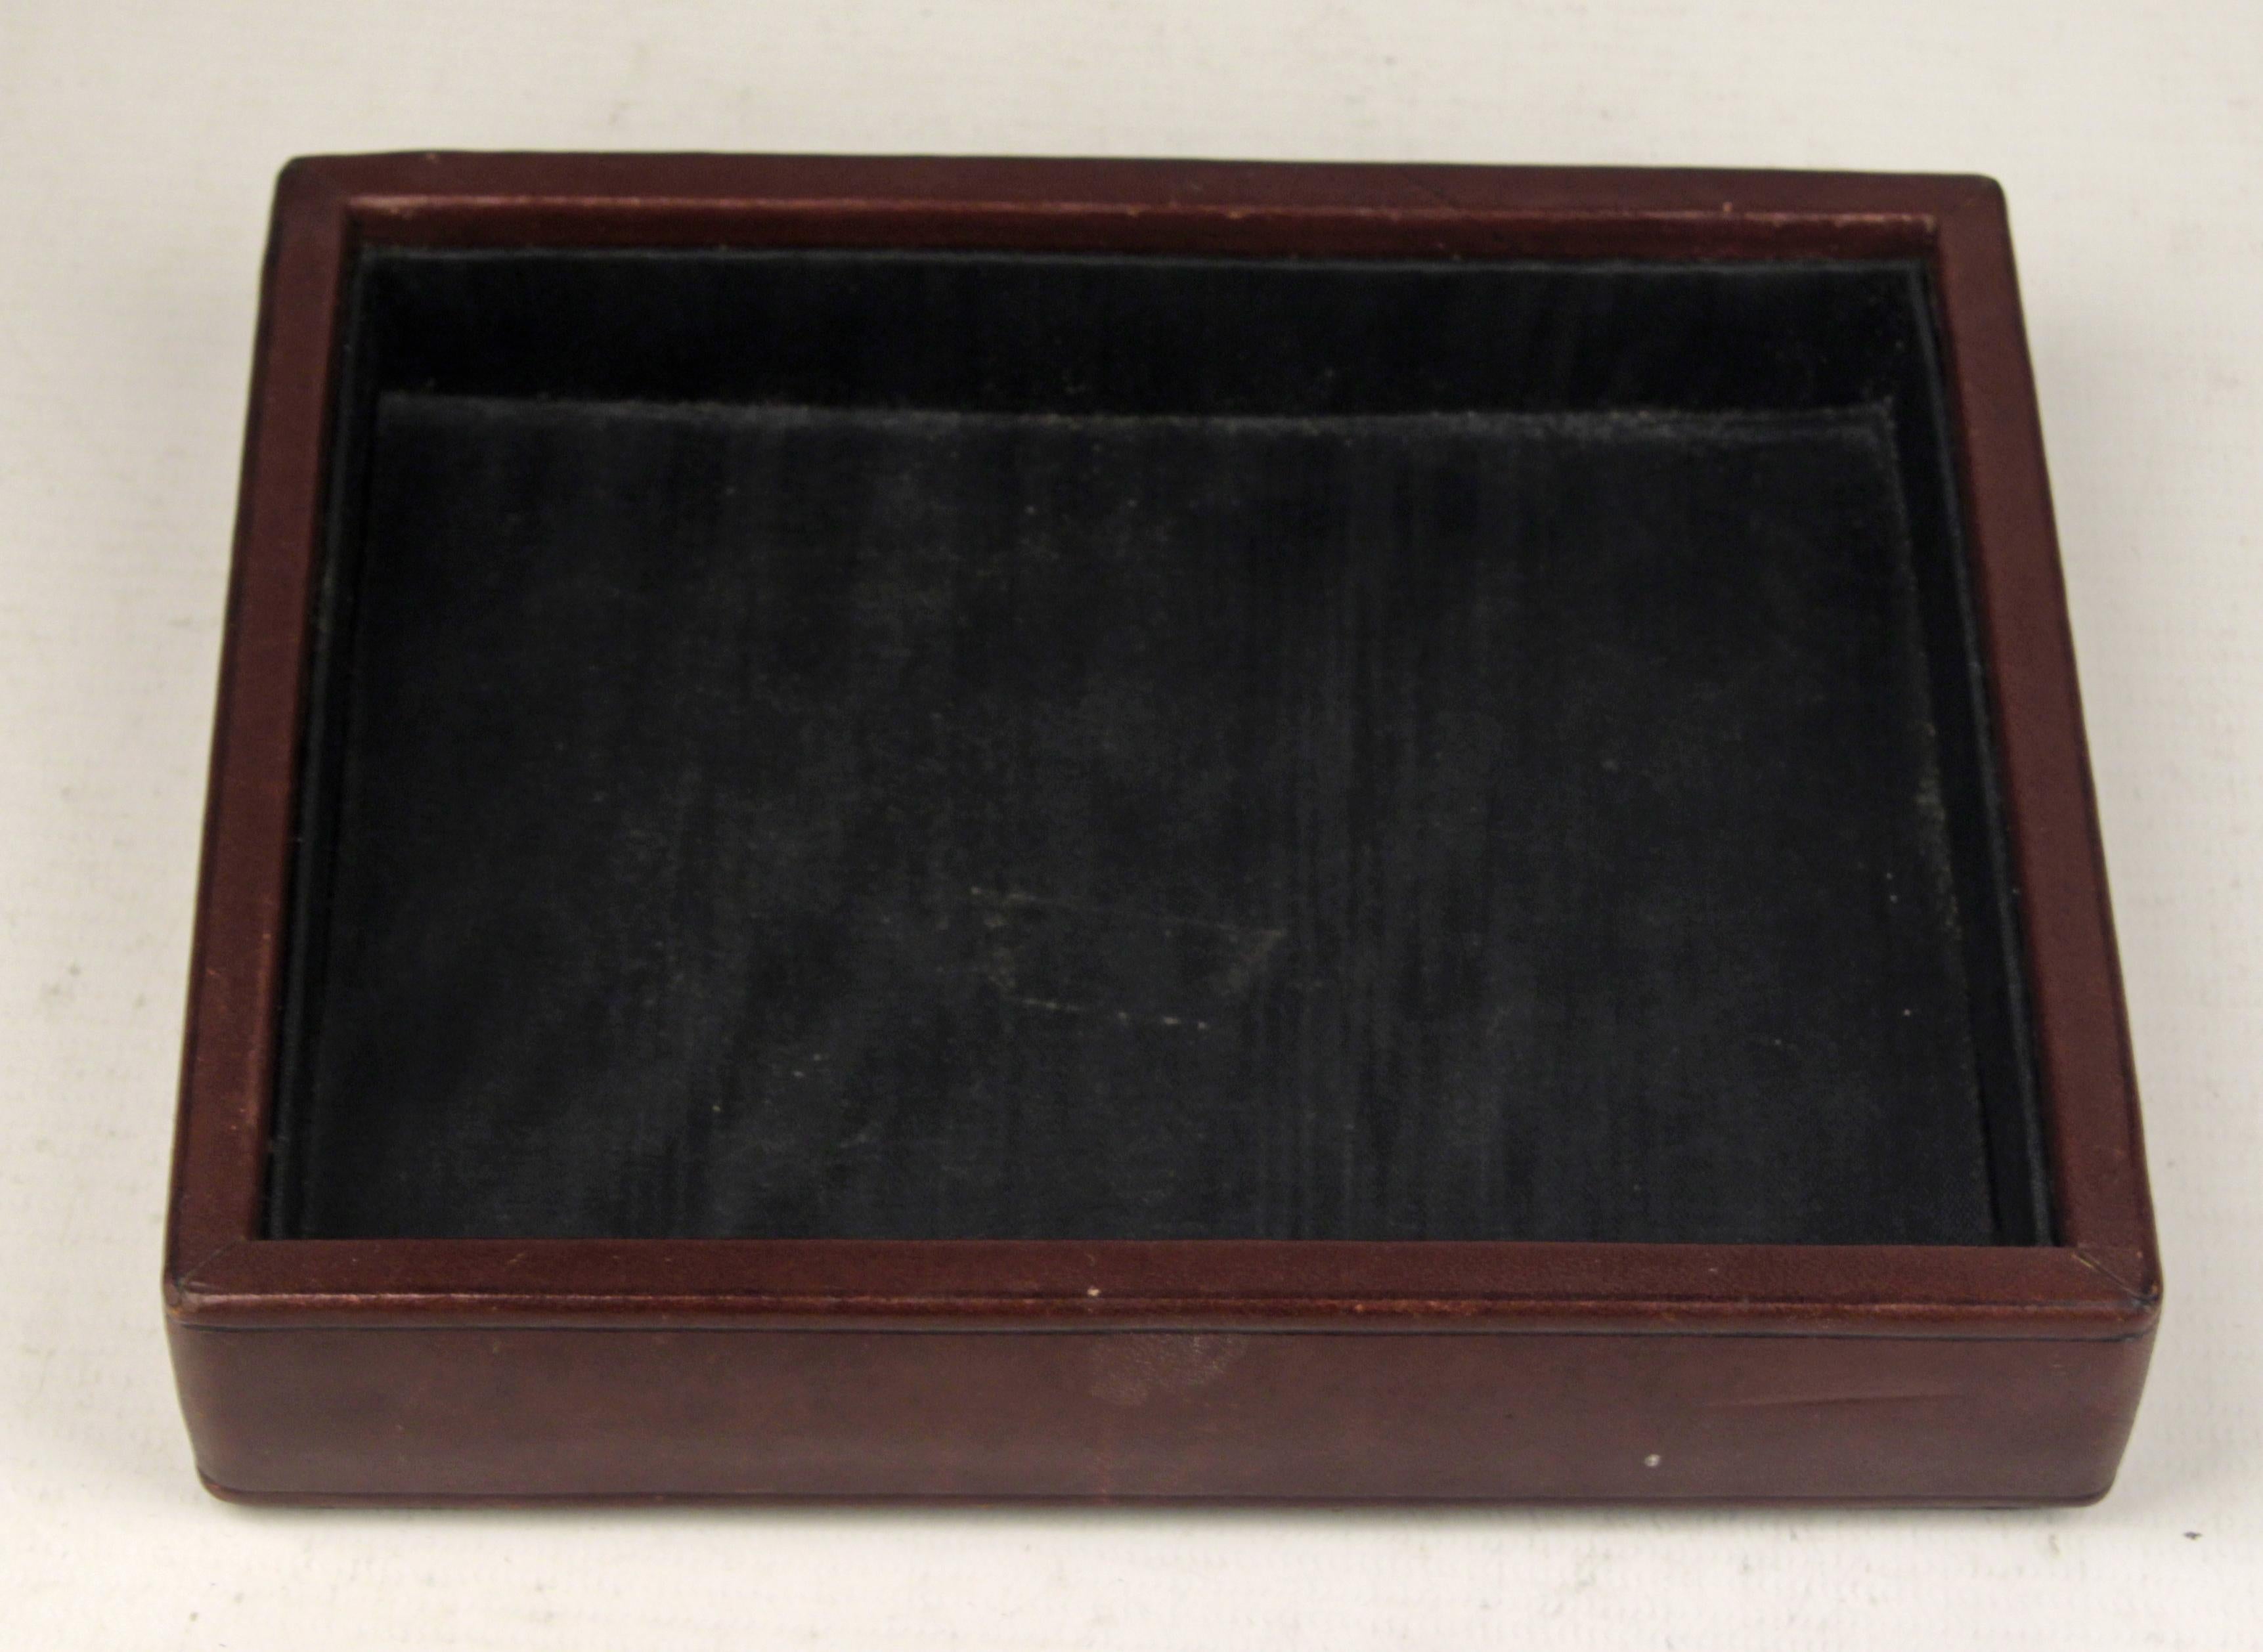 Cast Mid-20th Century Wooden Box with Silver Buckle Lid by French Brand Hermès Paris